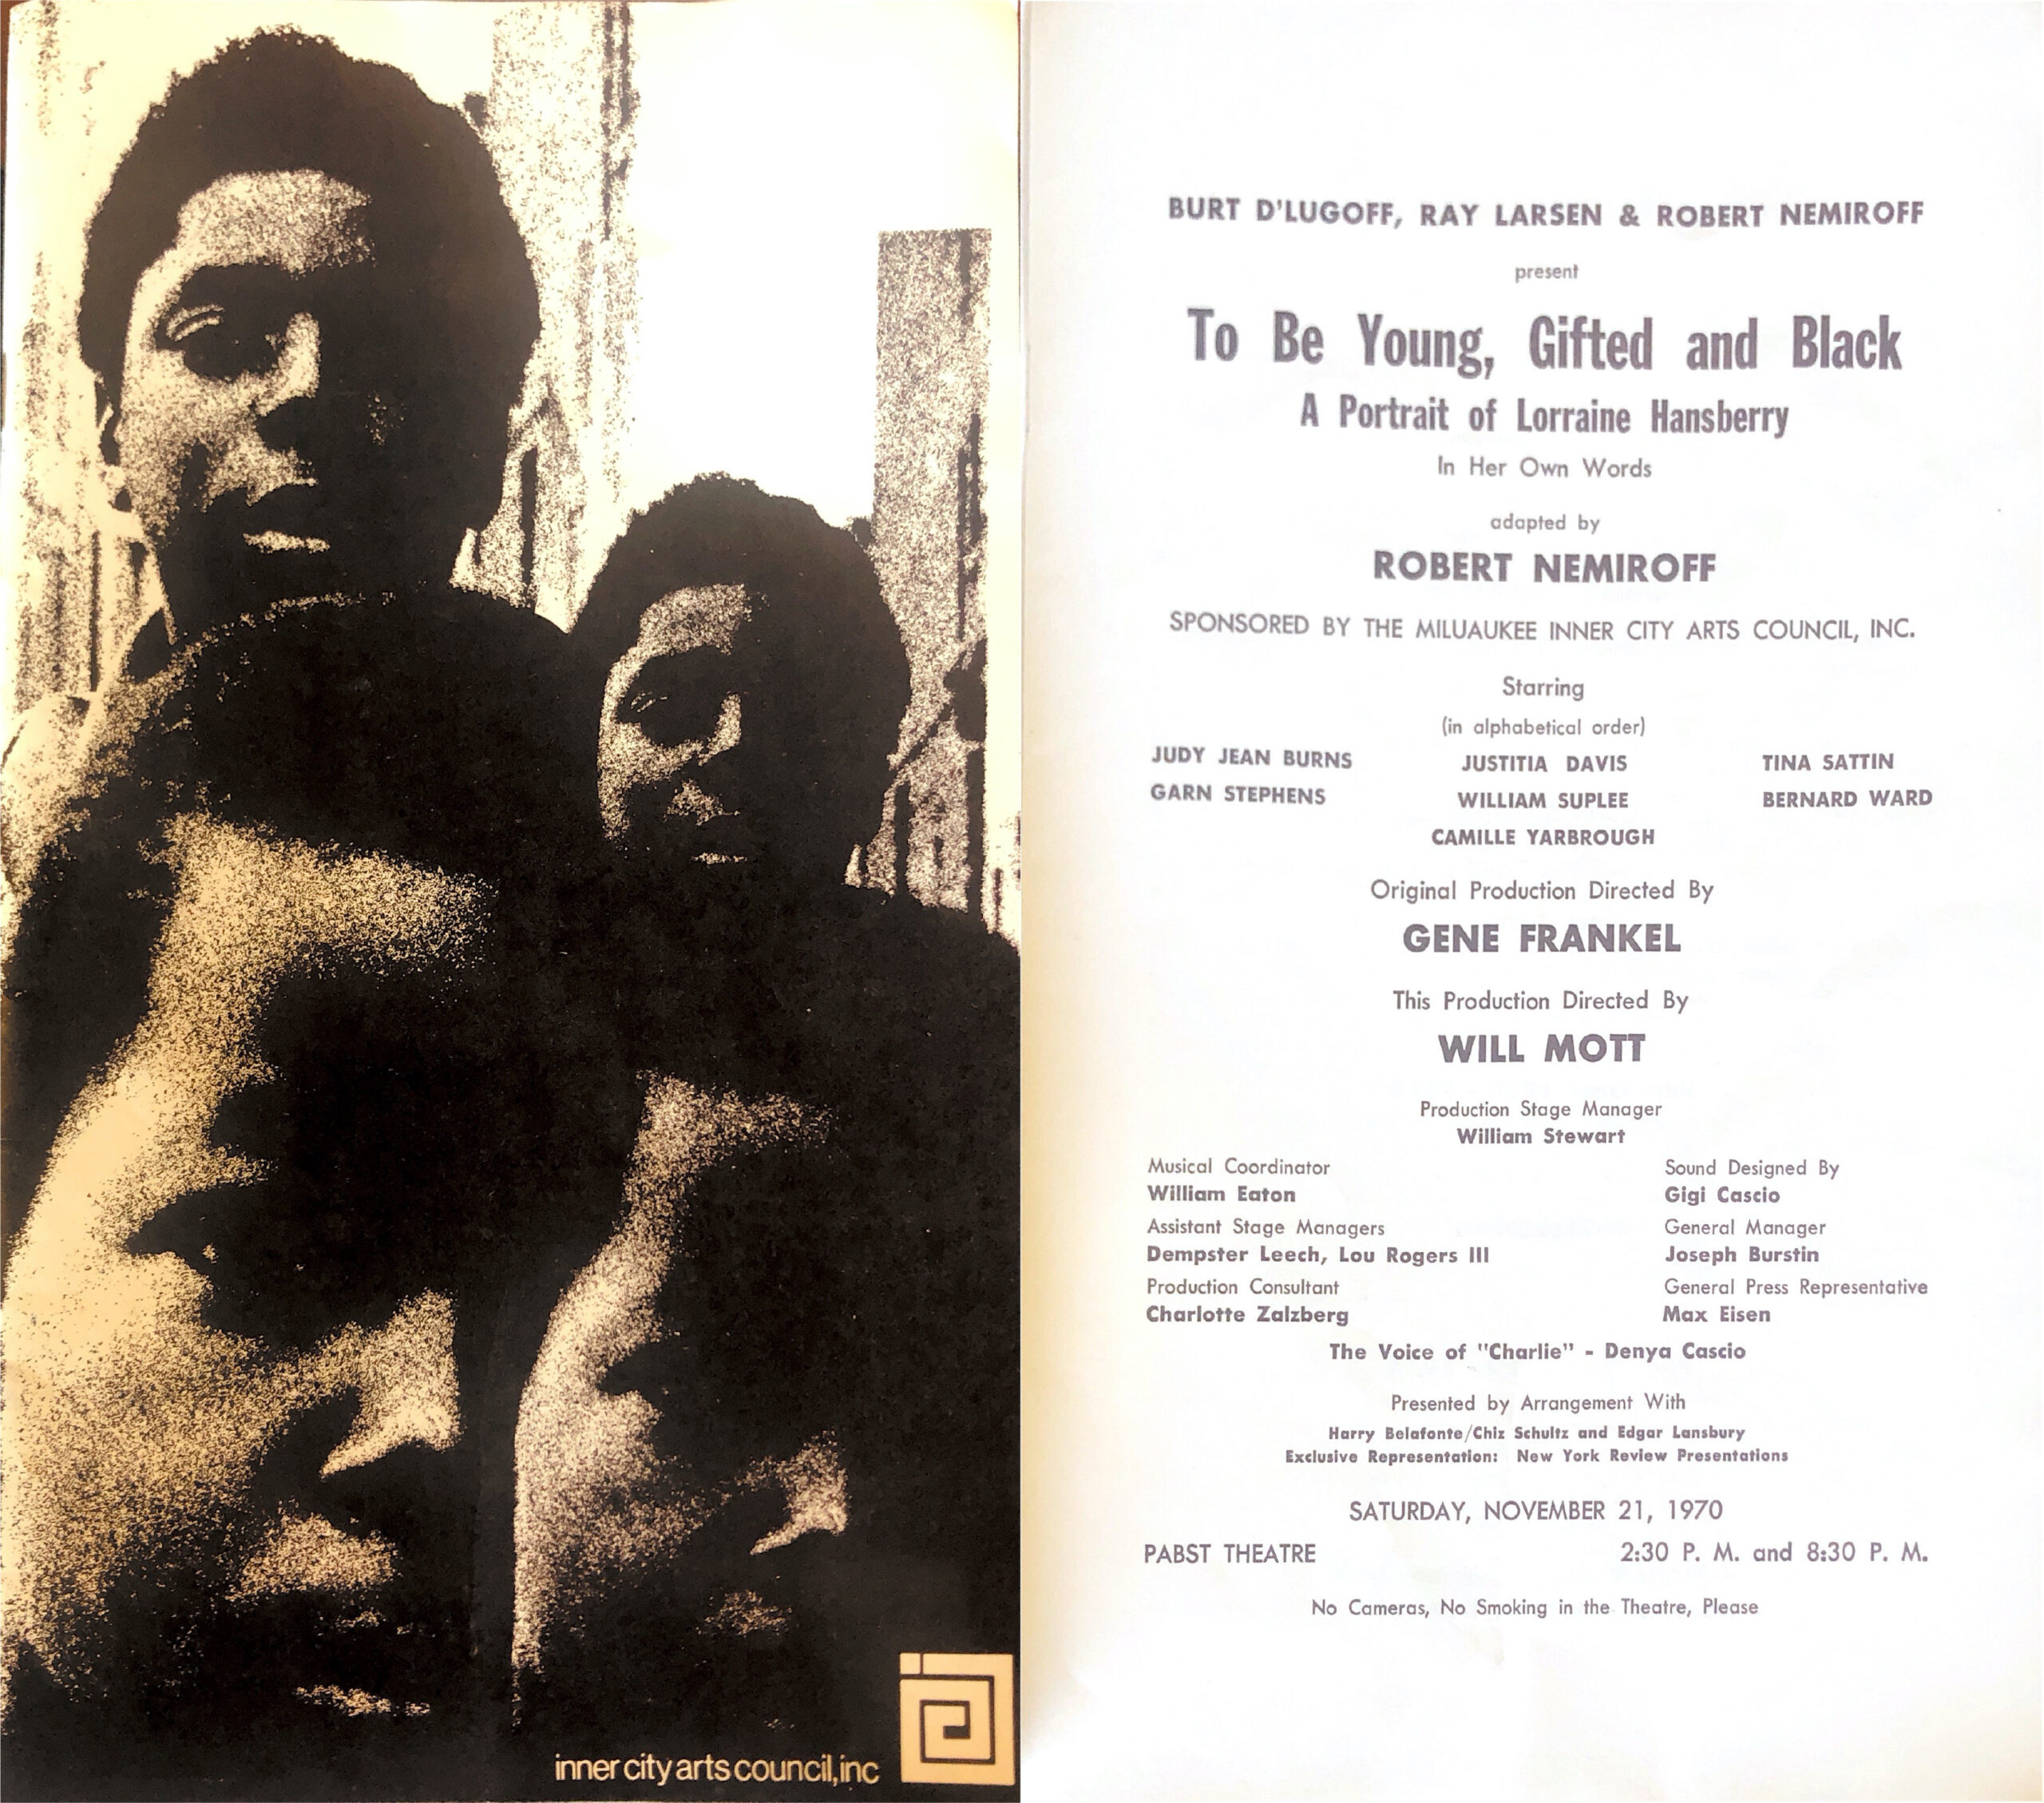 A program from a 1970 performance of To Be Young, Gifted and Black at the Inner City Arts Council